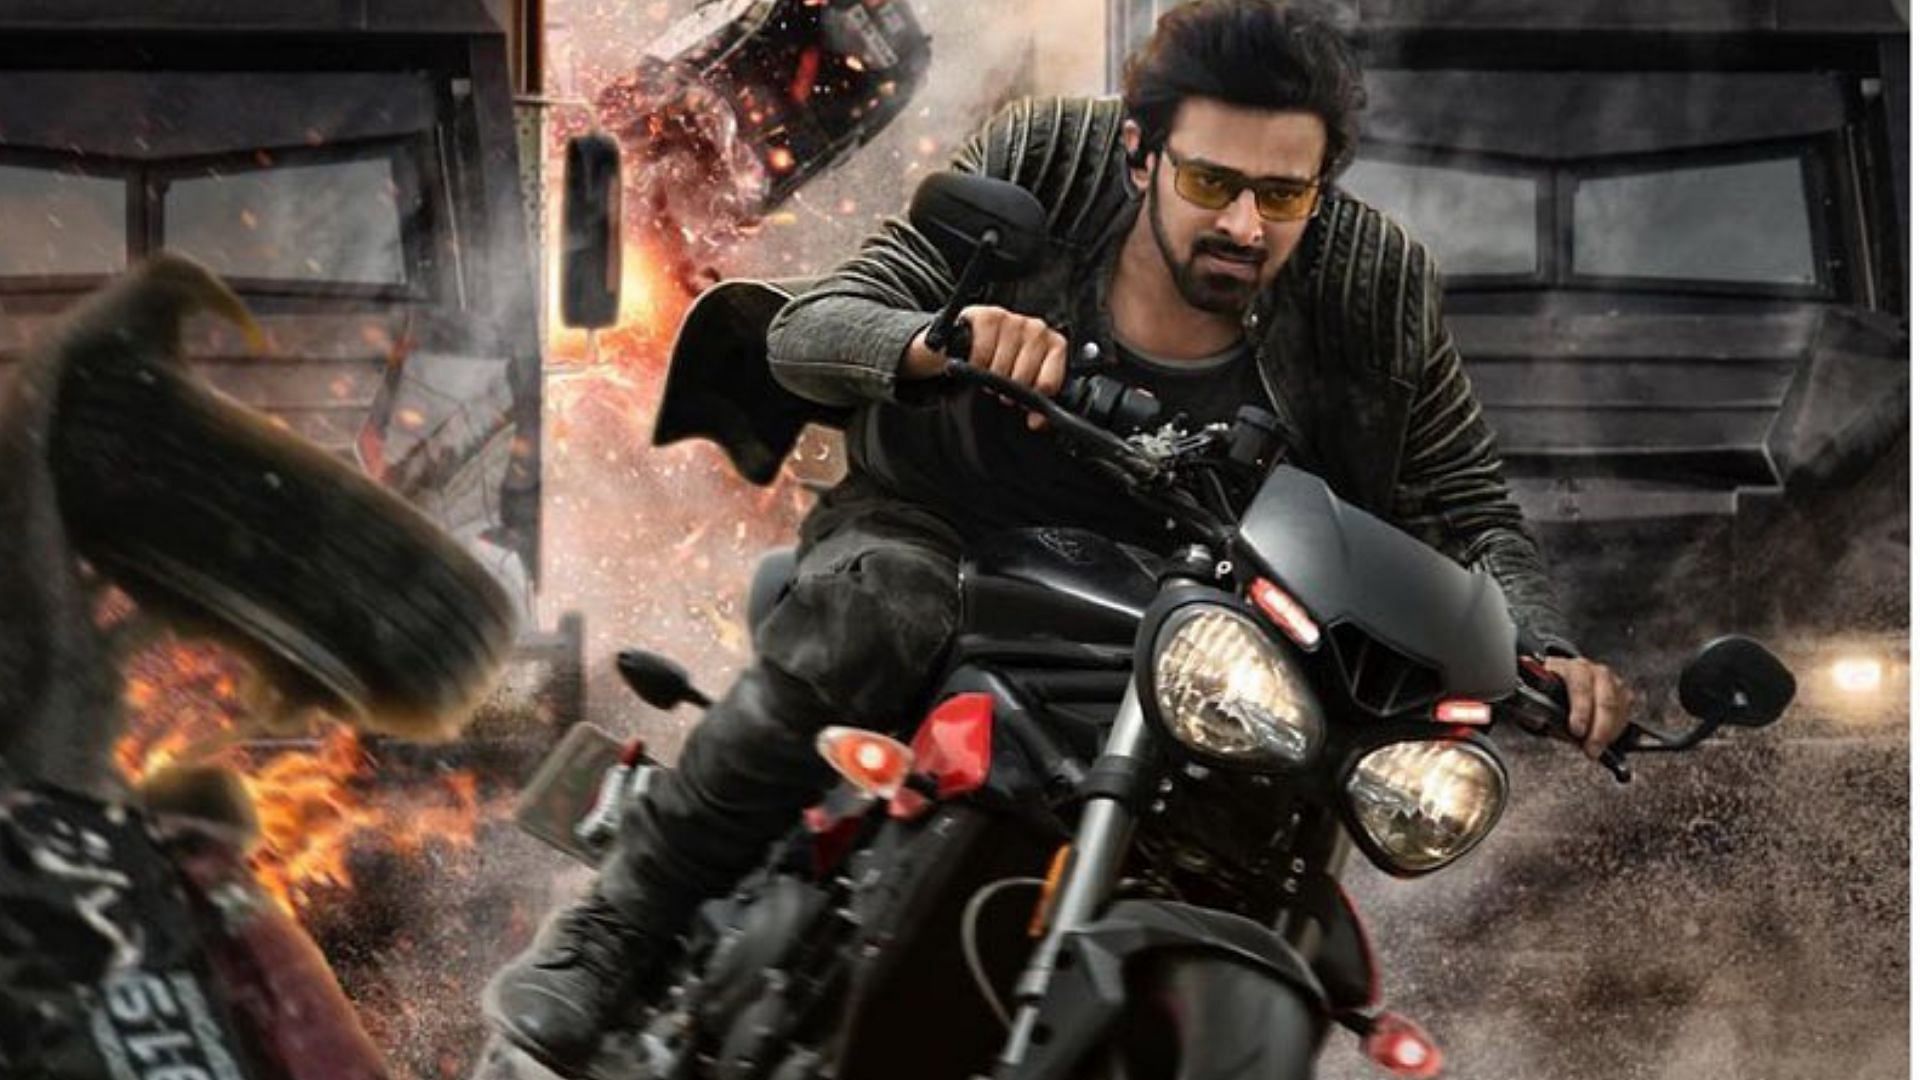 Prabhas in a poster from <i>Saaho</i>.